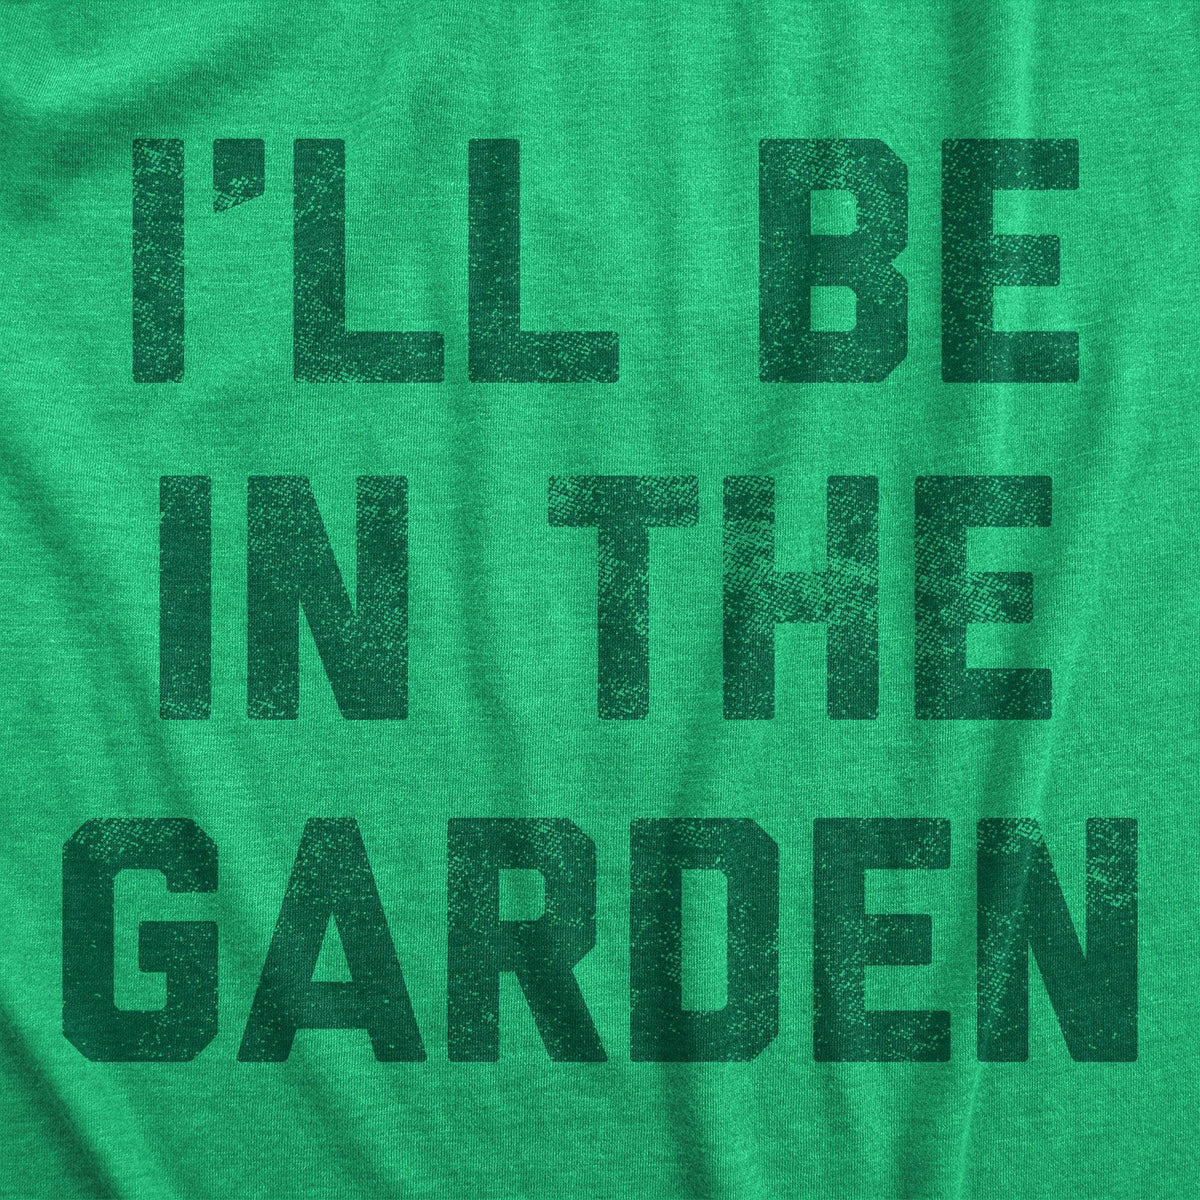 Ill Be In The Garden Women&#39;s Tshirt  -  Crazy Dog T-Shirts